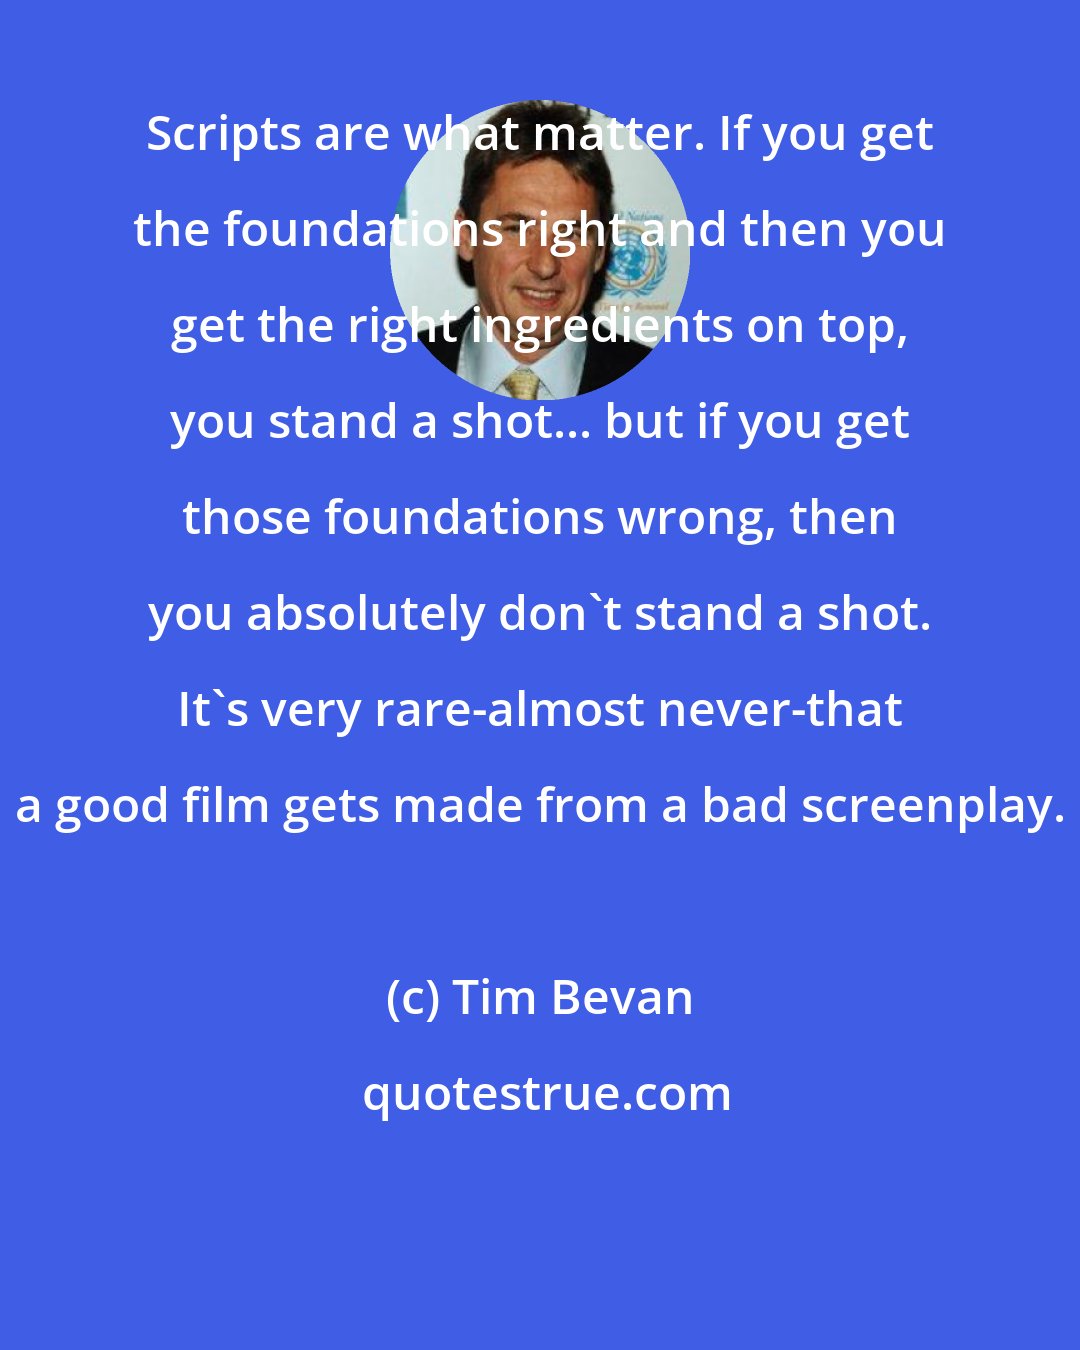 Tim Bevan: Scripts are what matter. If you get the foundations right and then you get the right ingredients on top, you stand a shot... but if you get those foundations wrong, then you absolutely don't stand a shot. It's very rare-almost never-that a good film gets made from a bad screenplay.